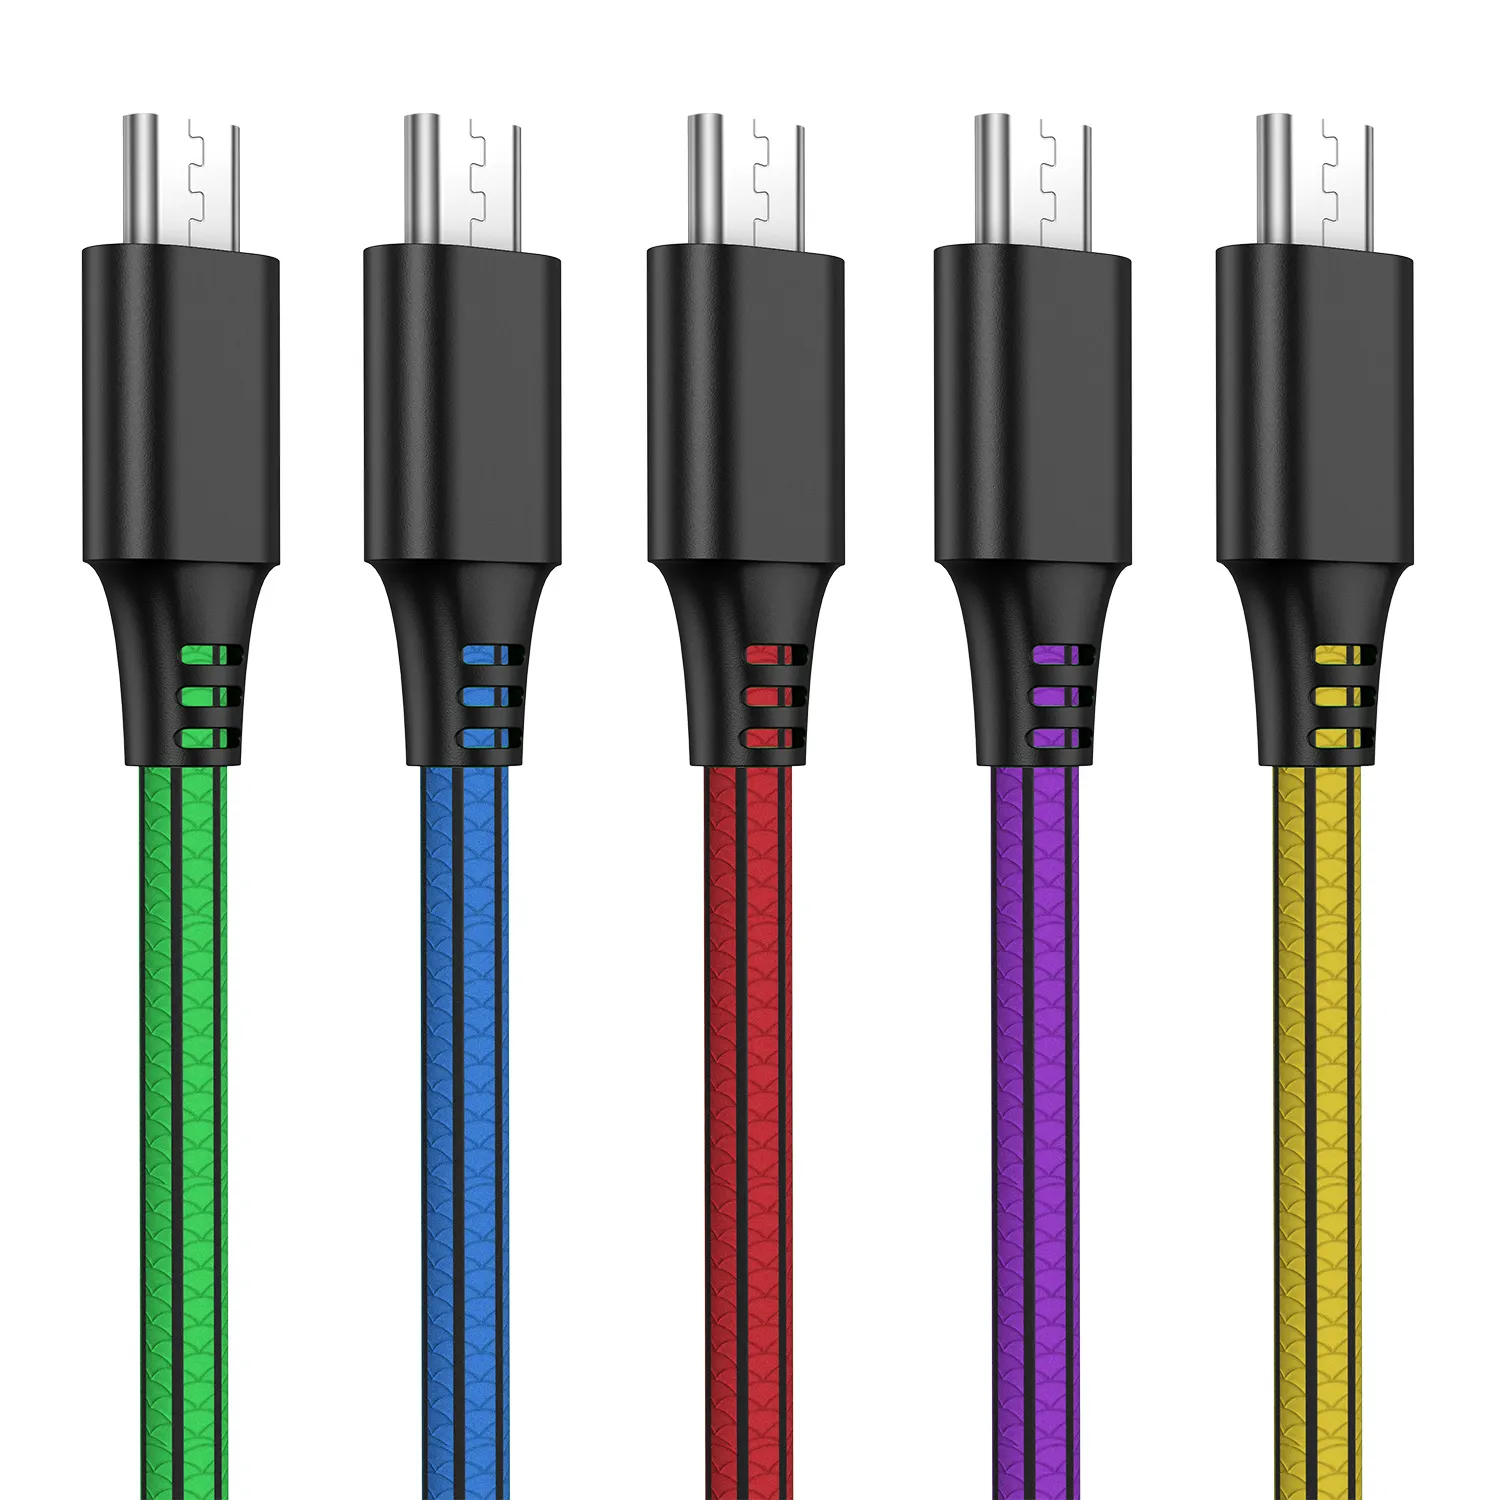 Most competitive PVC cable usb v8 durable charging cable micro usb charger for android phones